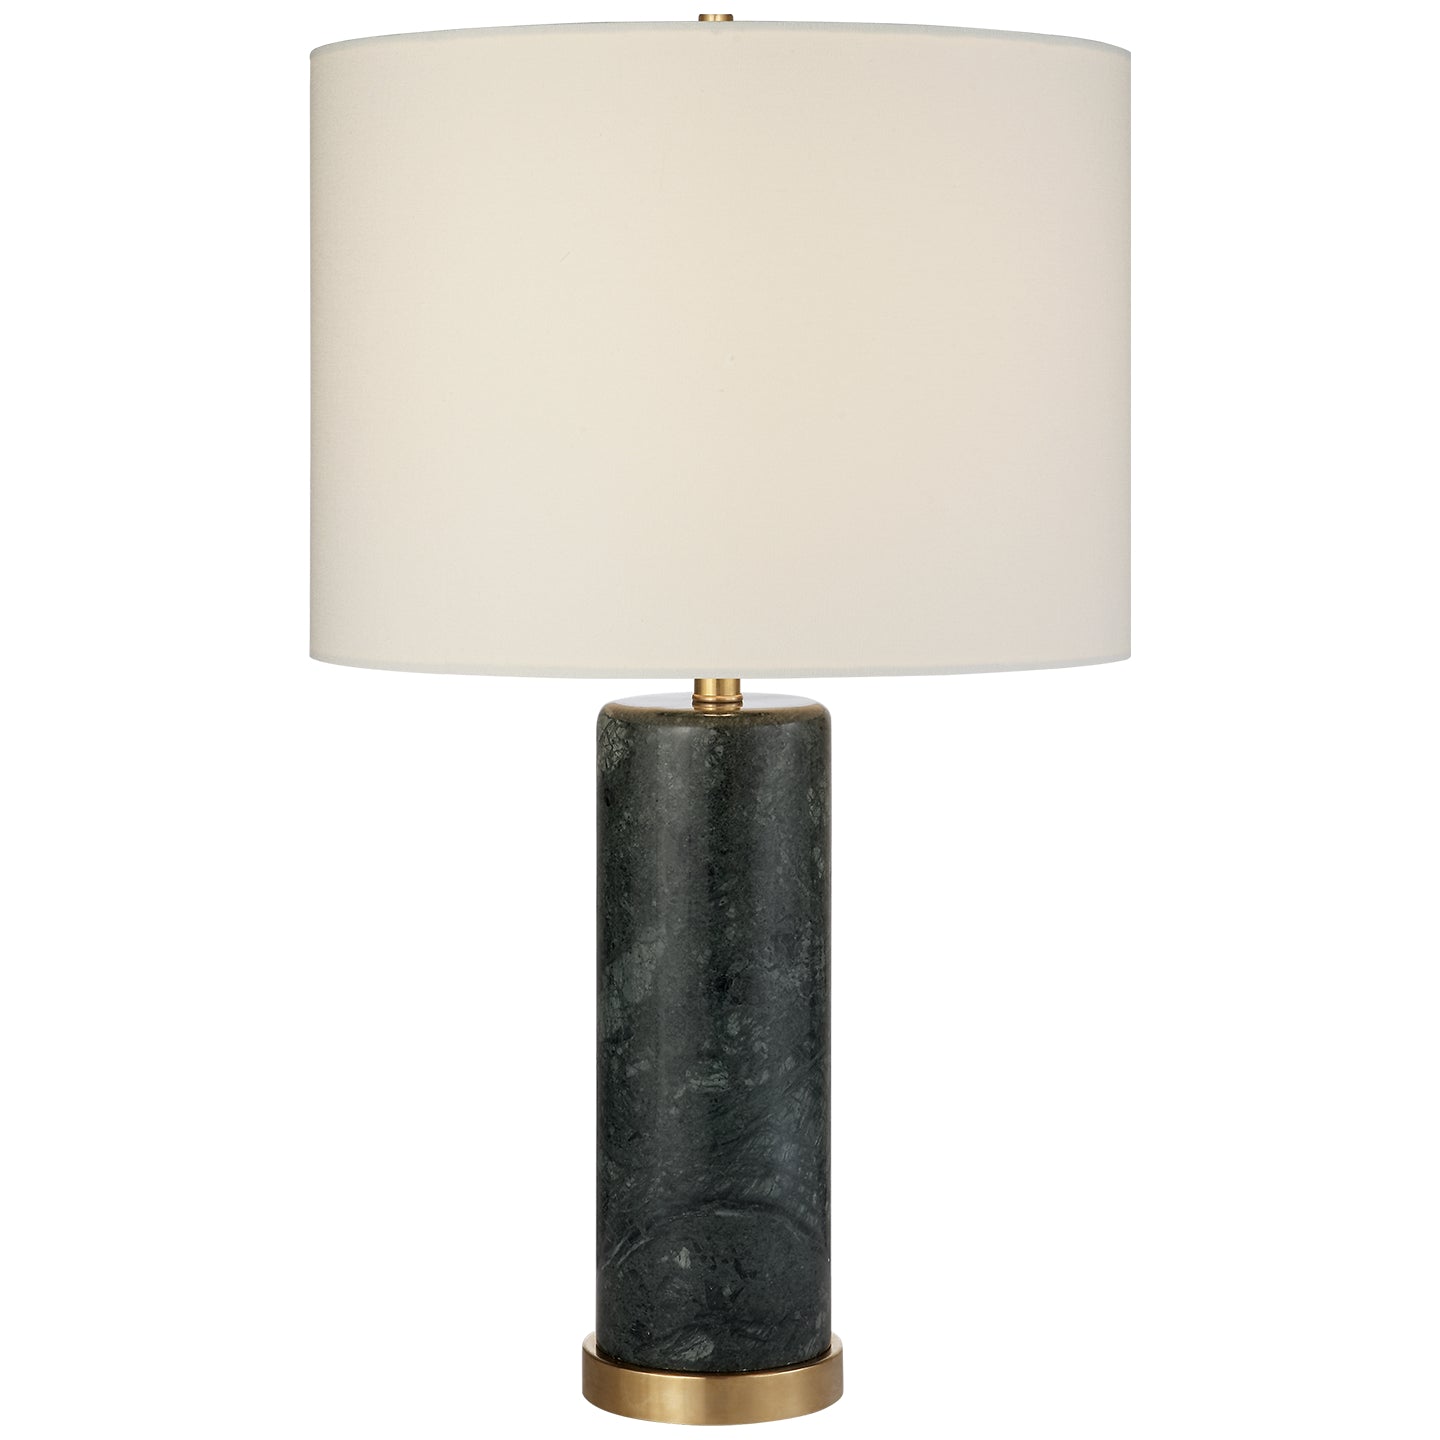 Load image into Gallery viewer, Visual Comfort Signature - ARN 3004GRM-L - One Light Table Lamp - Cliff - Green Marble
